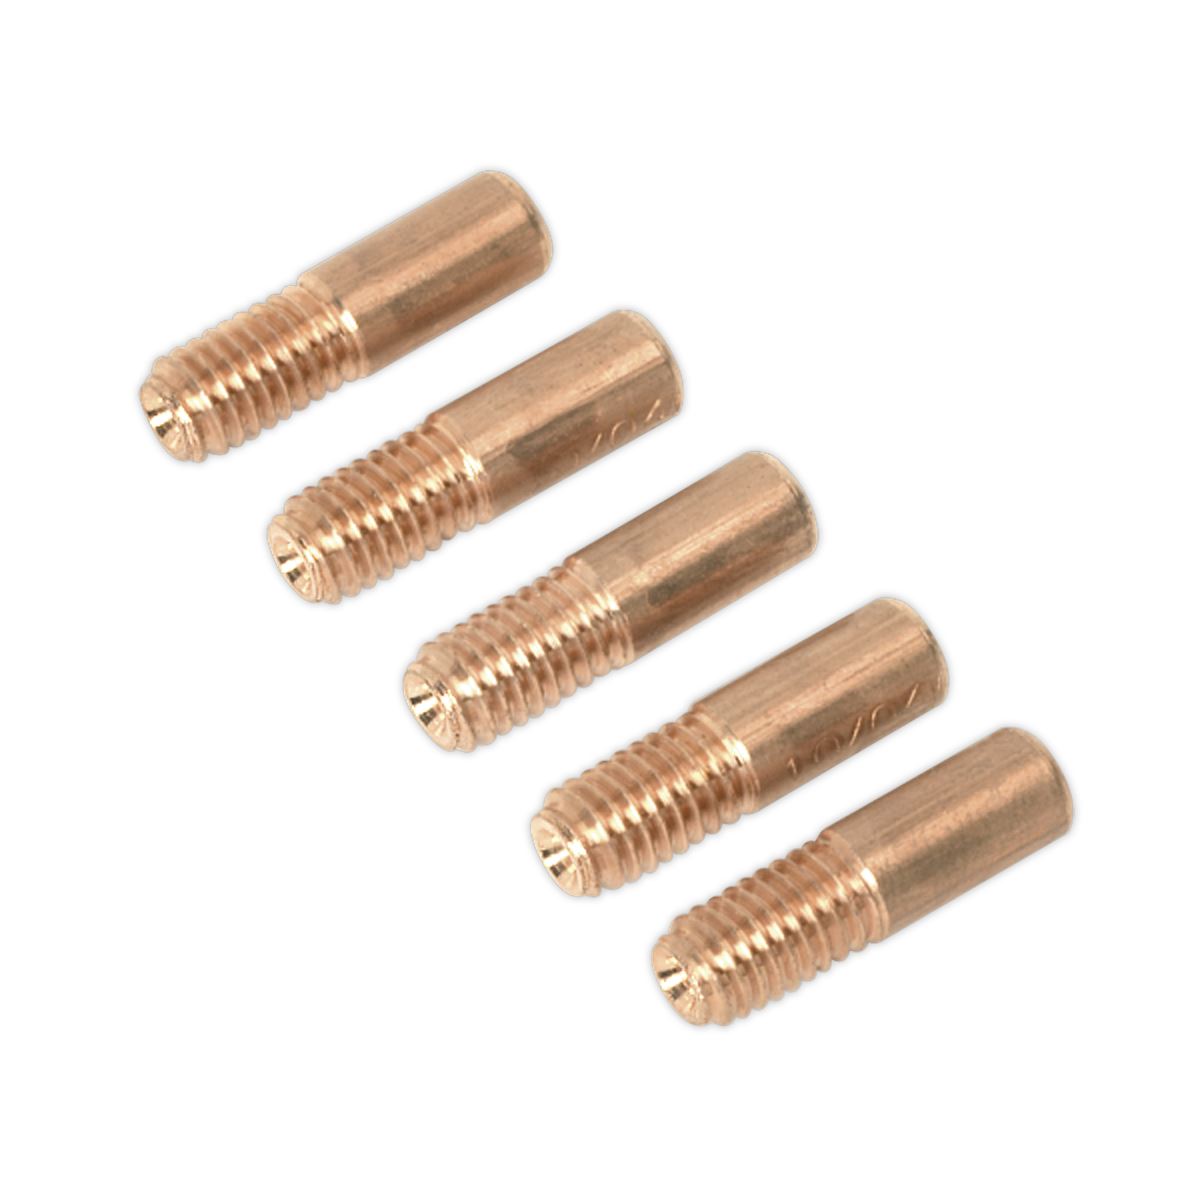 Sealey Contact Tip 1mm MB14 Pack of 5